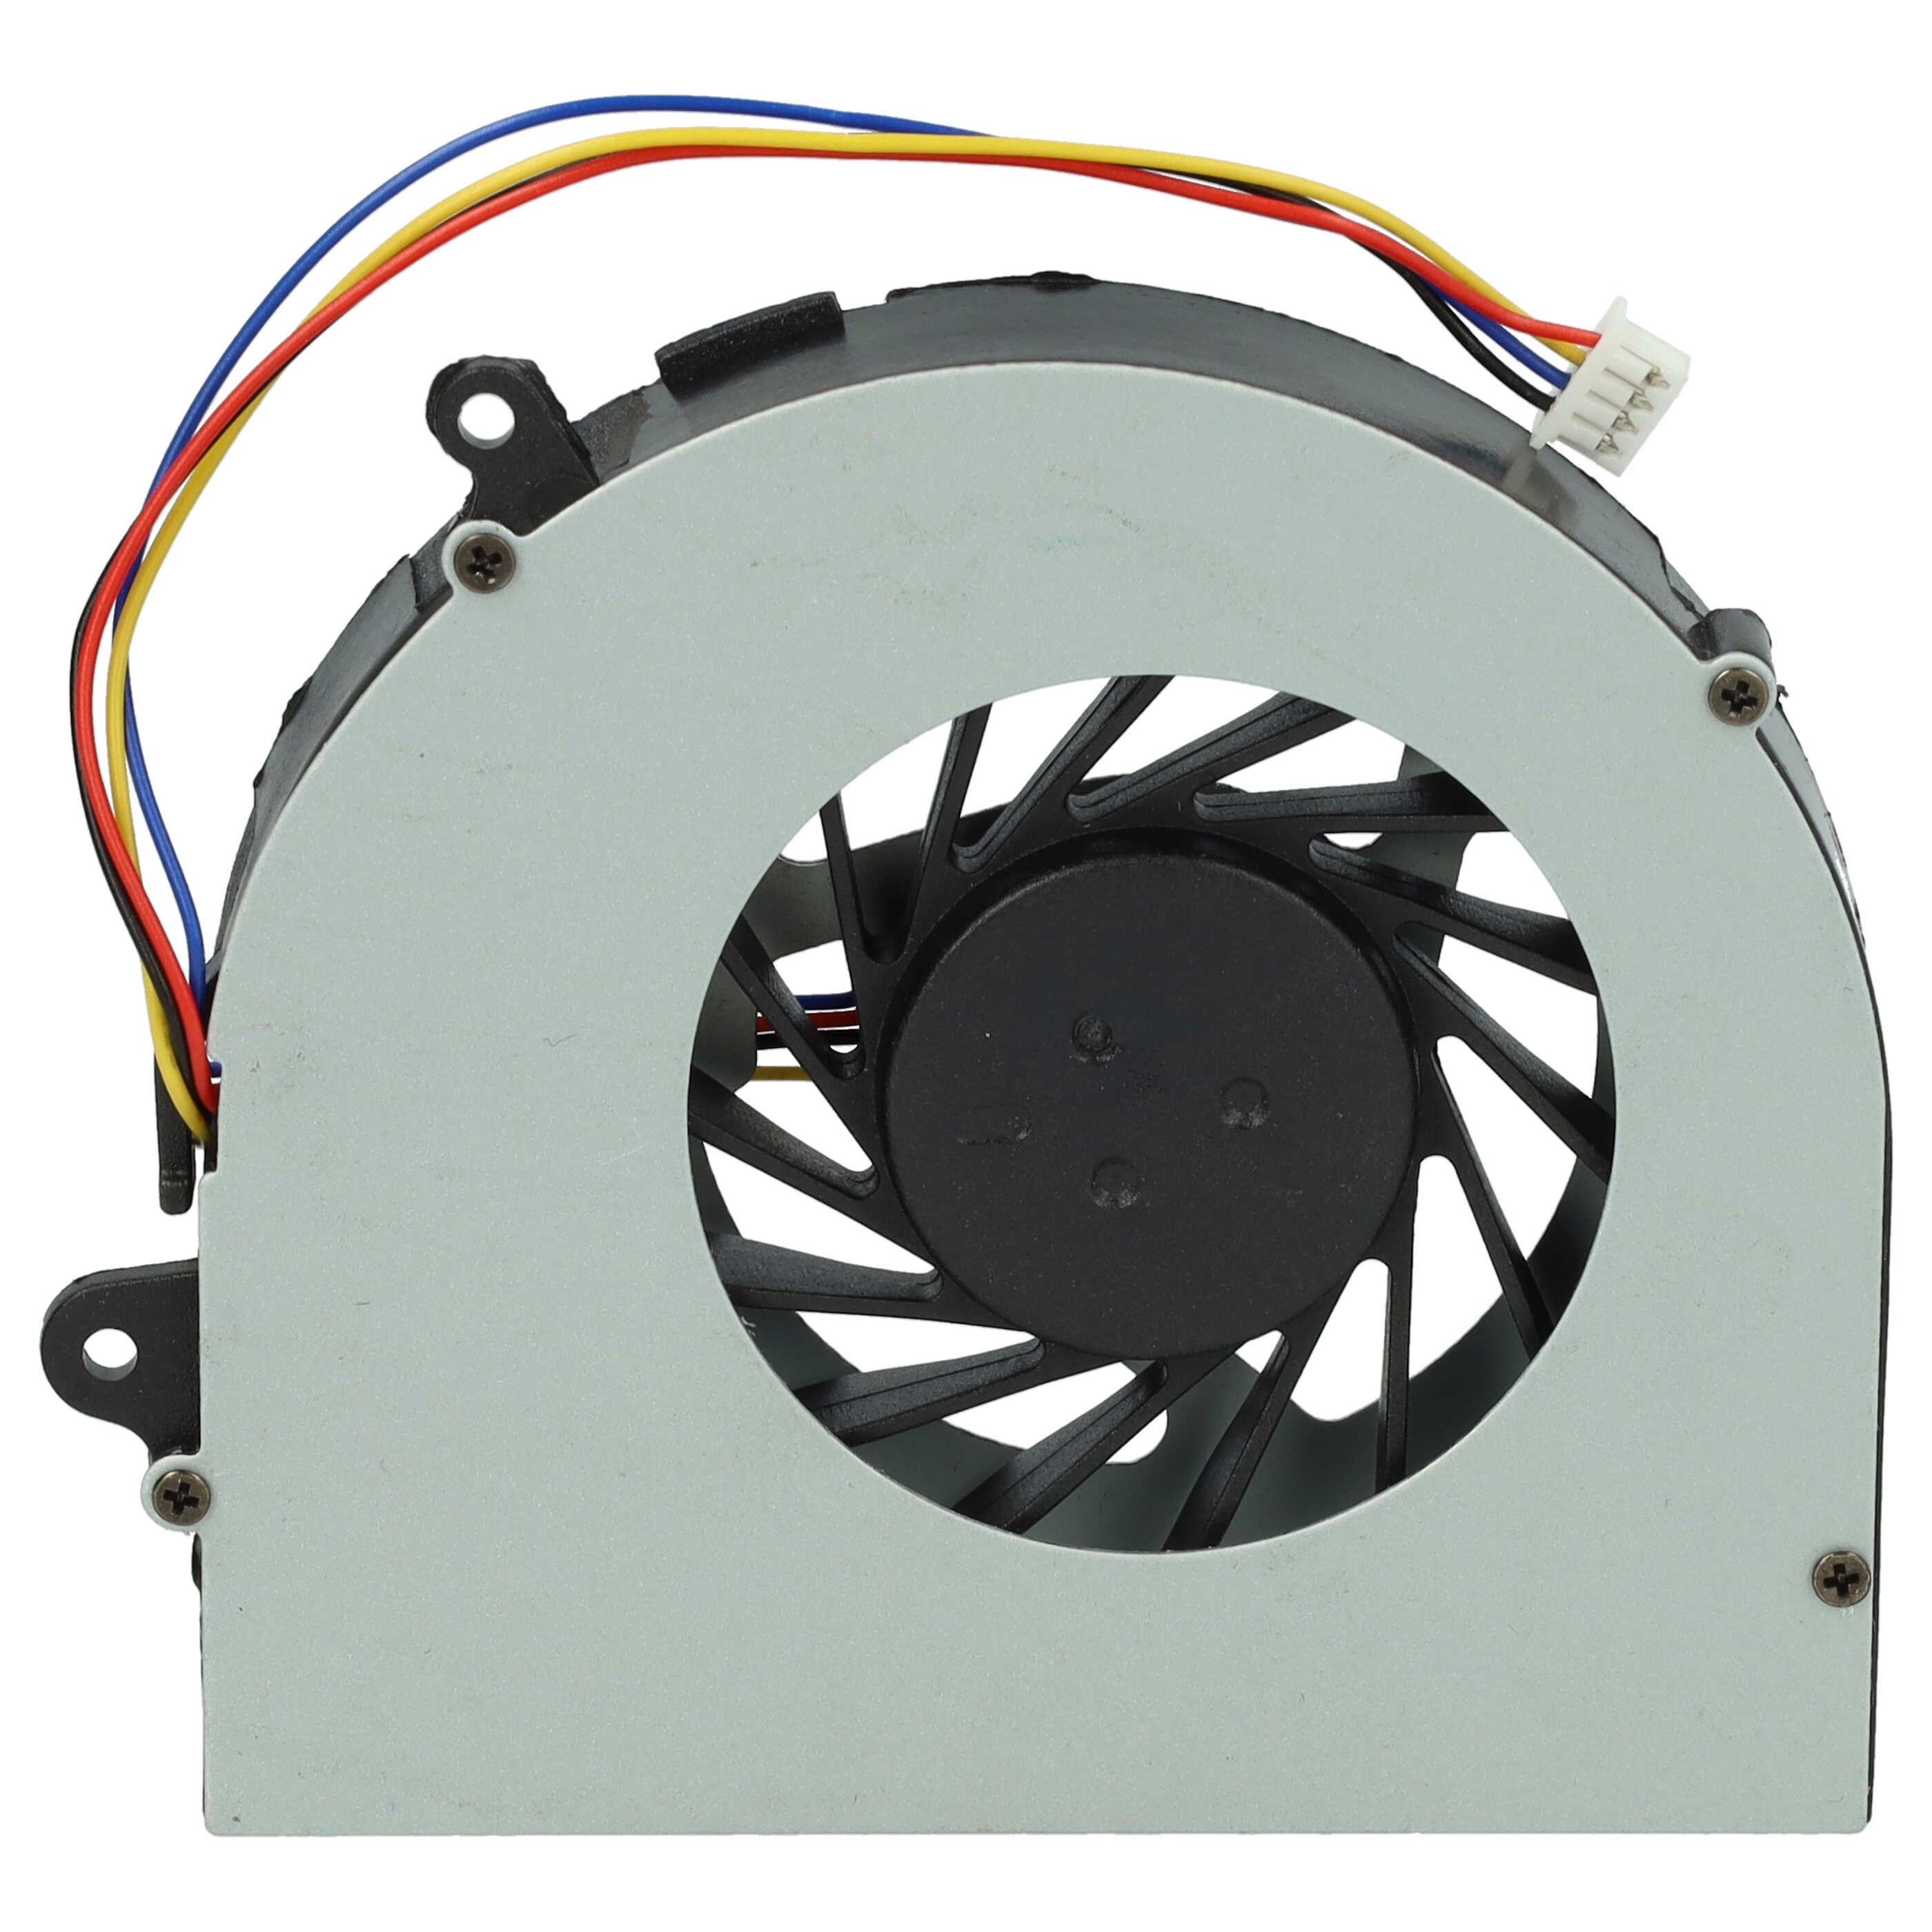 CPU / GPU Fan suitable for IBM / Lenovo IdeaPad G580, G585 Notebook 79 x 66 x 13 mm